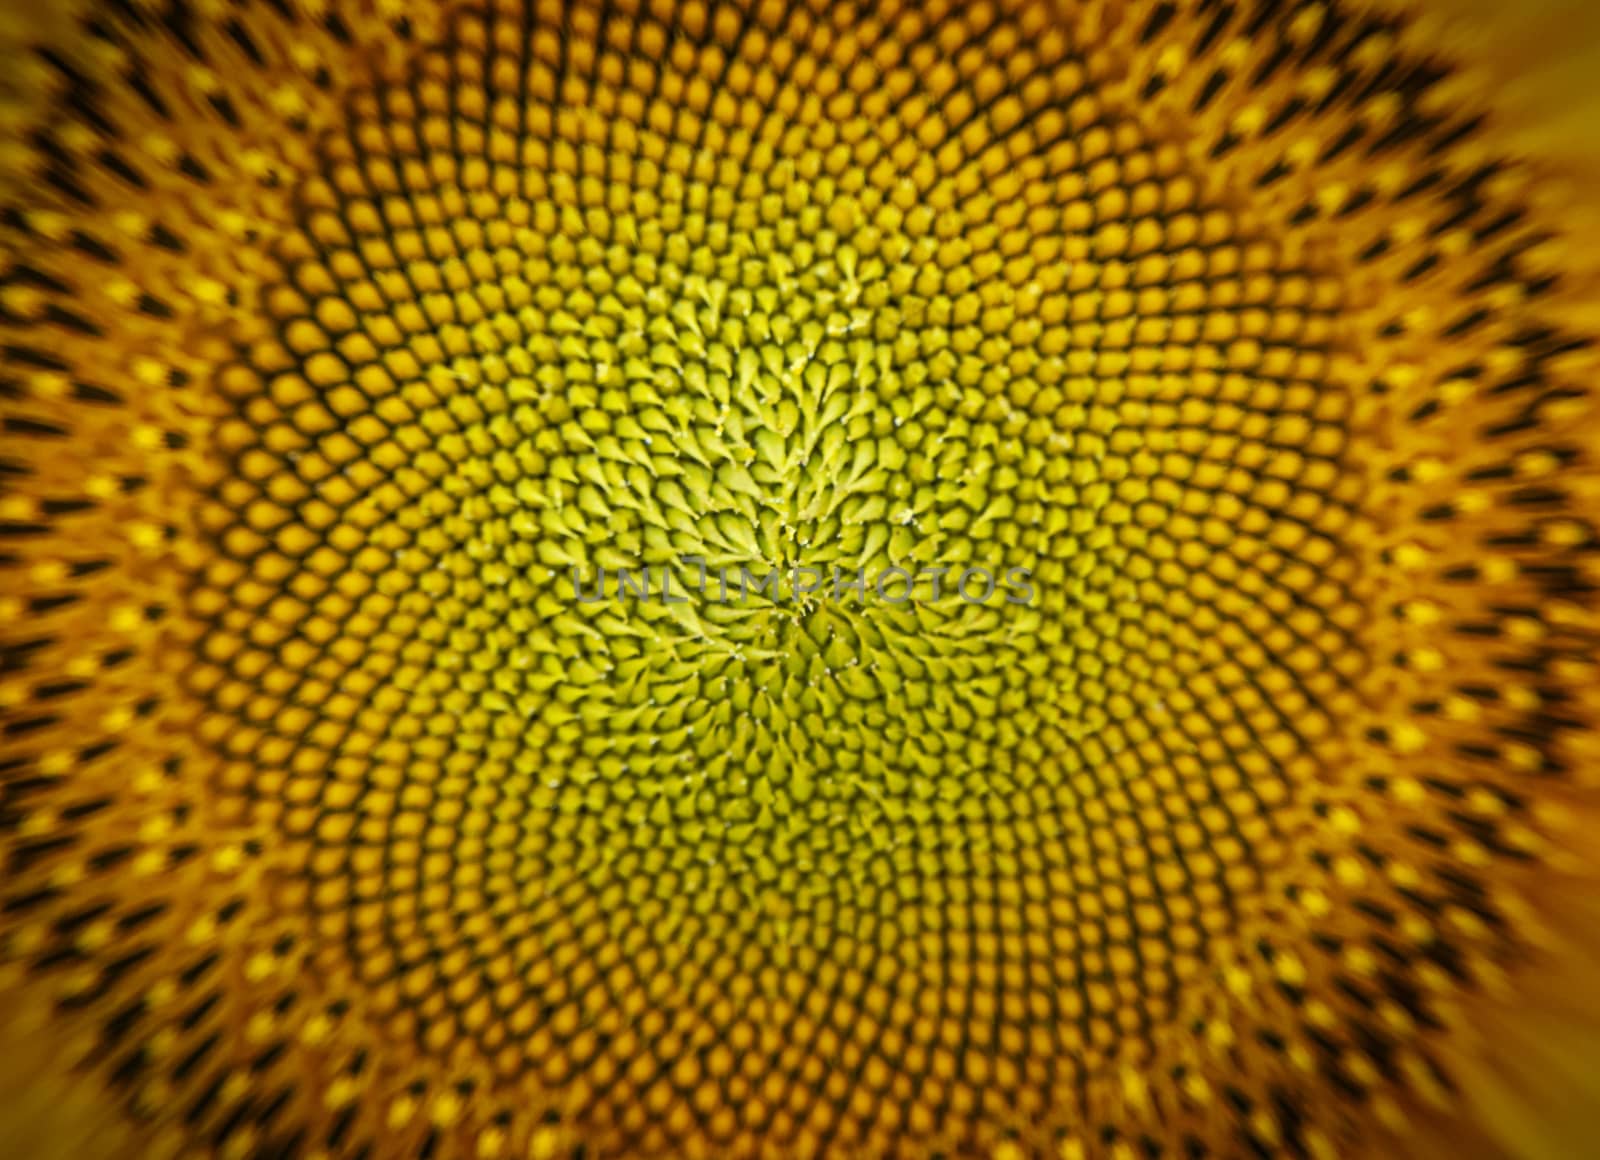 Macro sunflower seeds. Abstract nature. Stock photography.